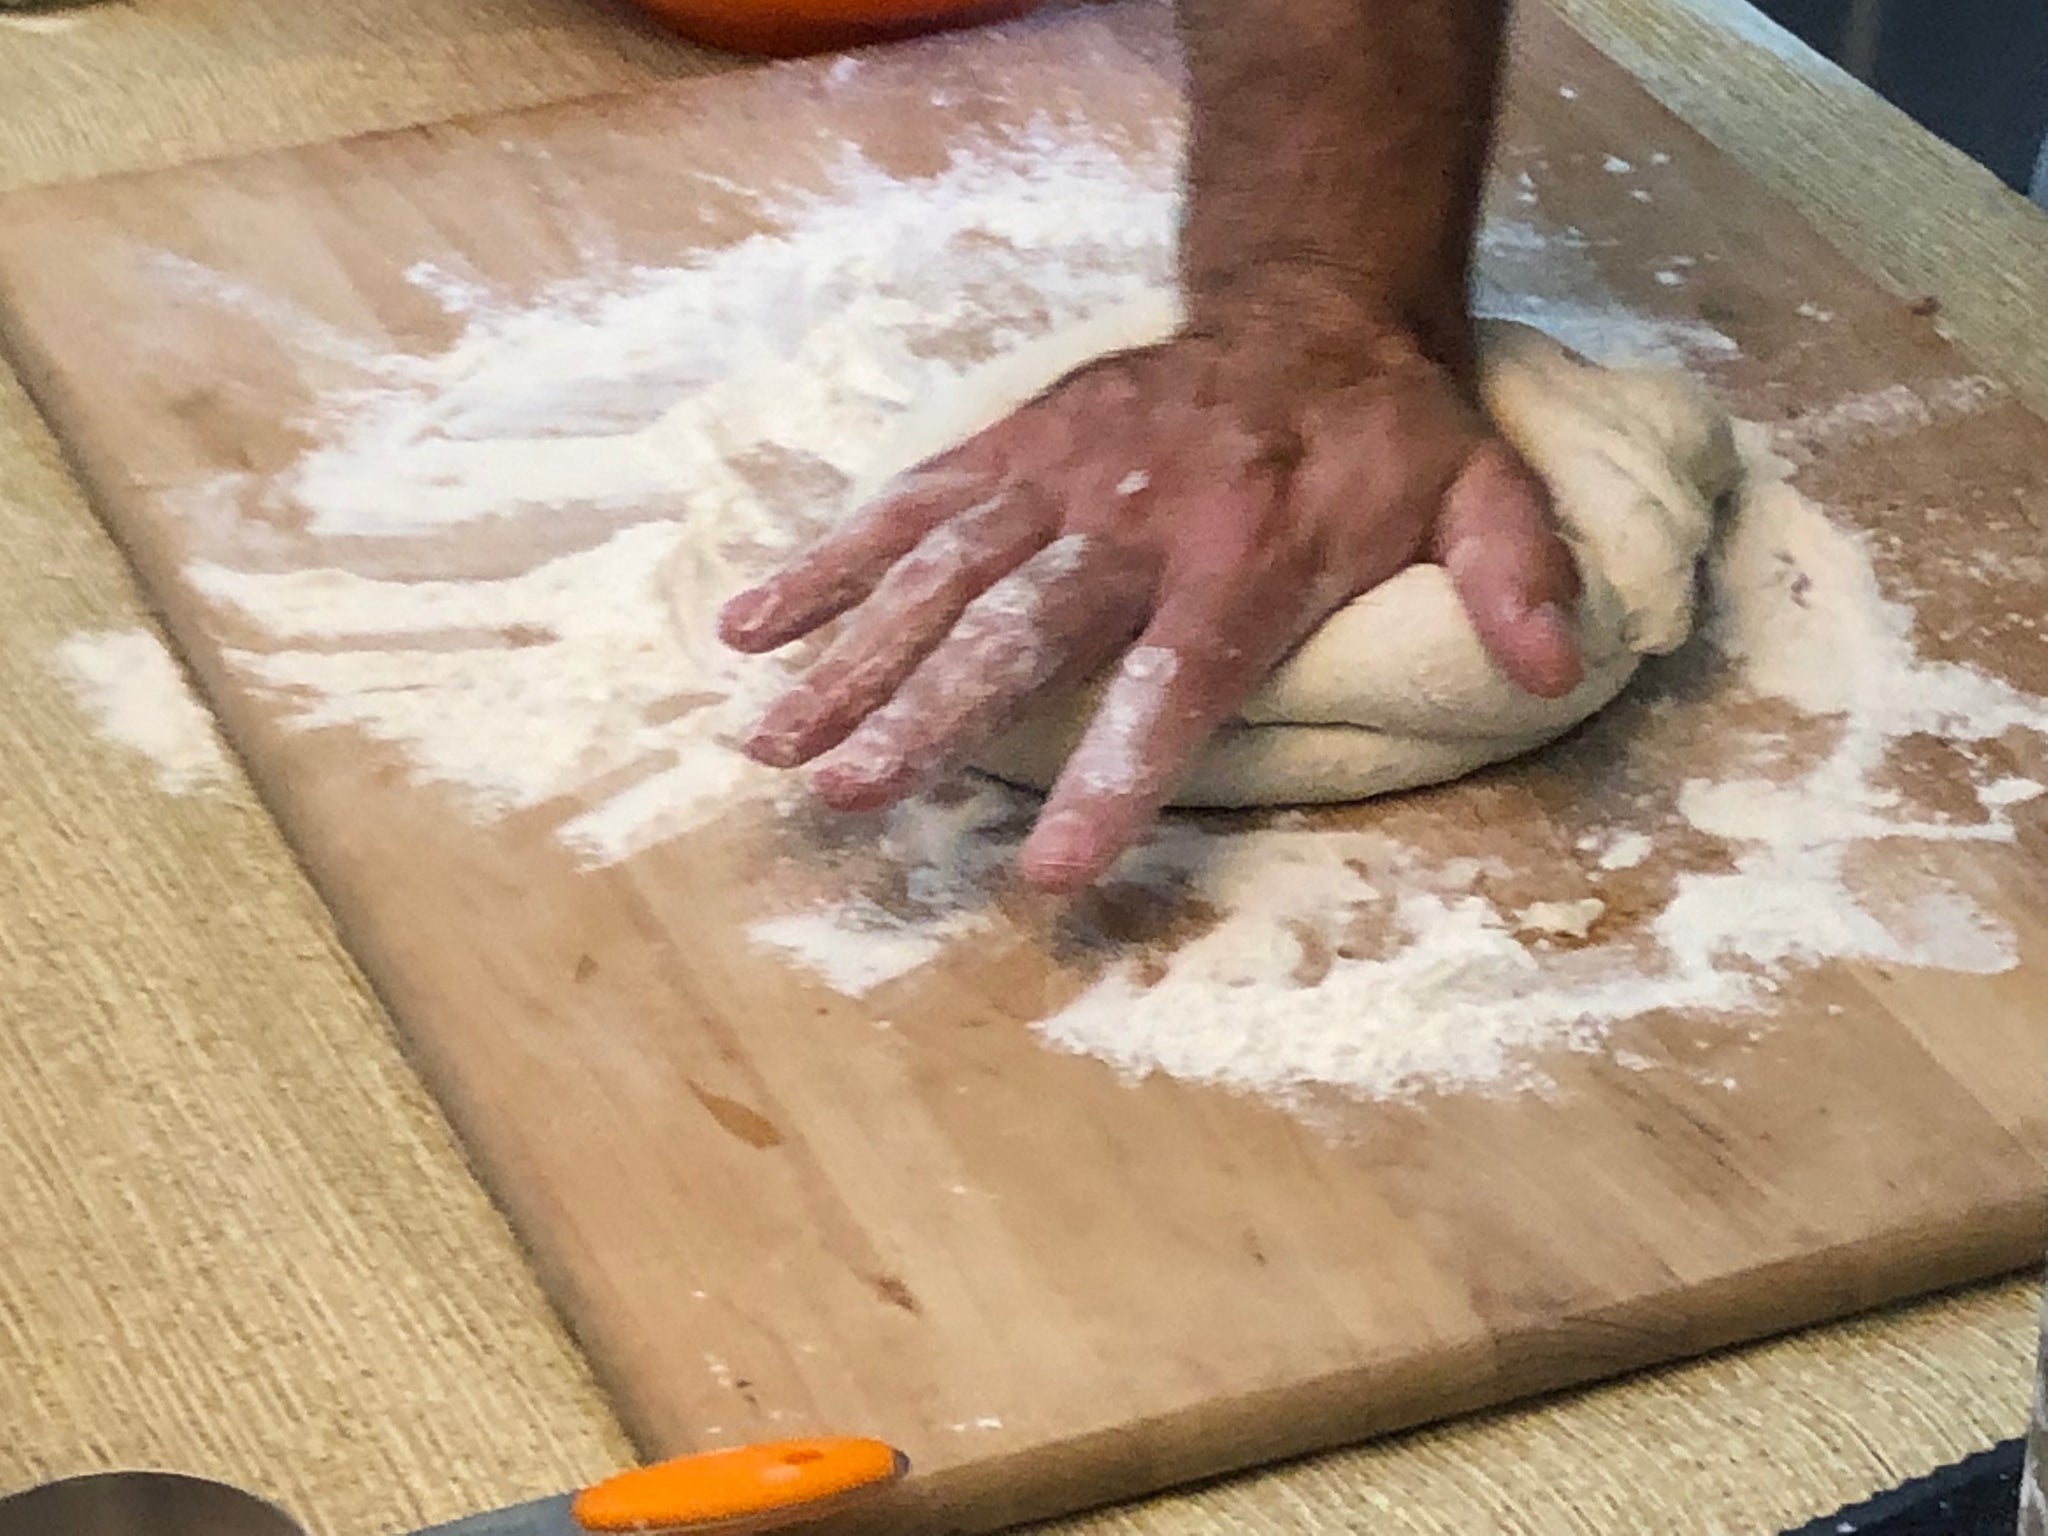 Sourdough 101: From Starter to Loaf in No Time - 90+min